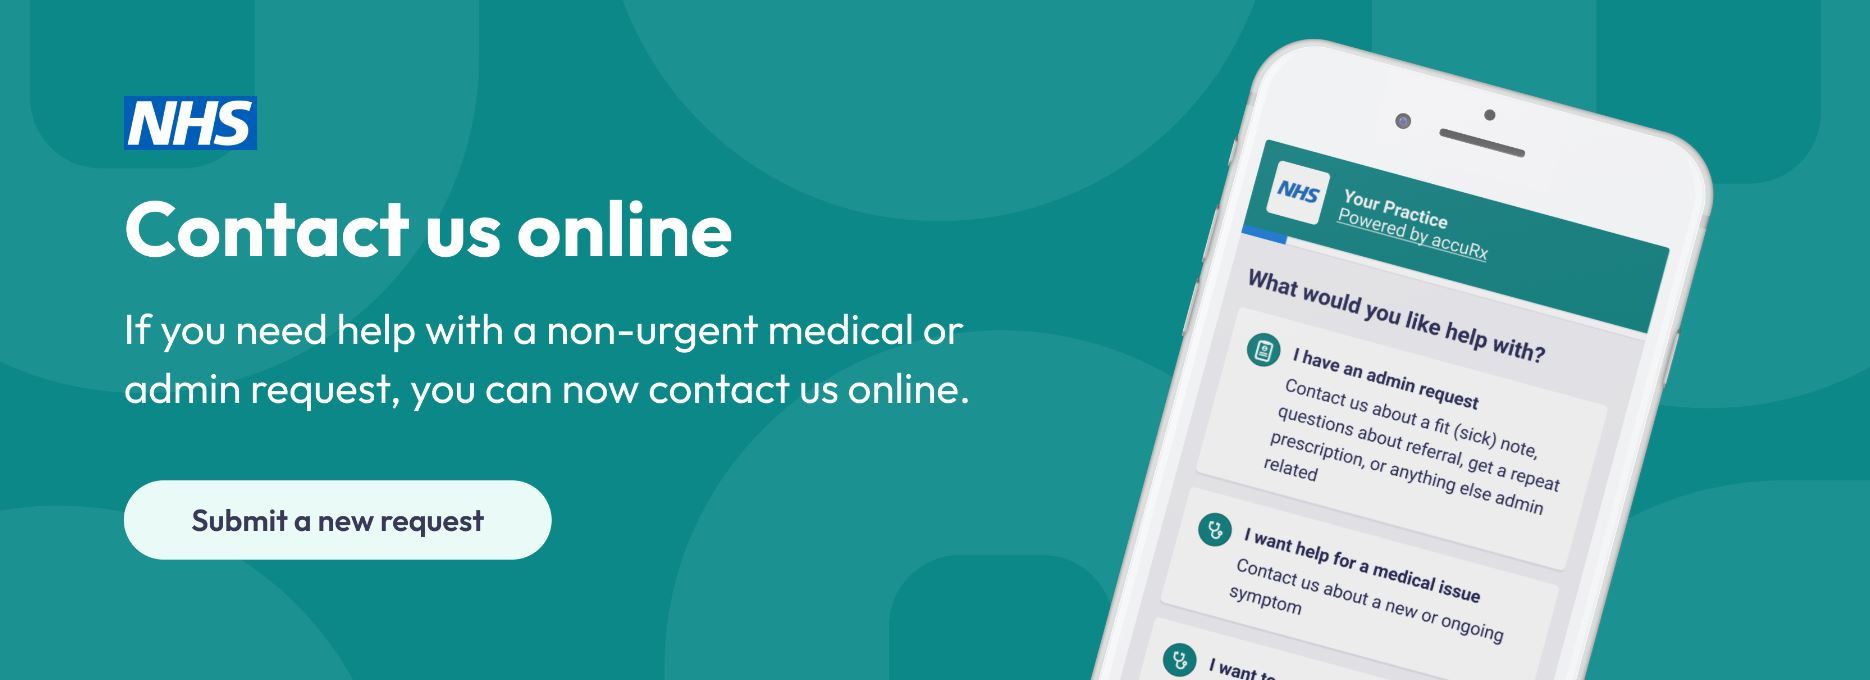 Contact Us Online - If you need help with a non-urgent medical or admin request, you can now contact us online